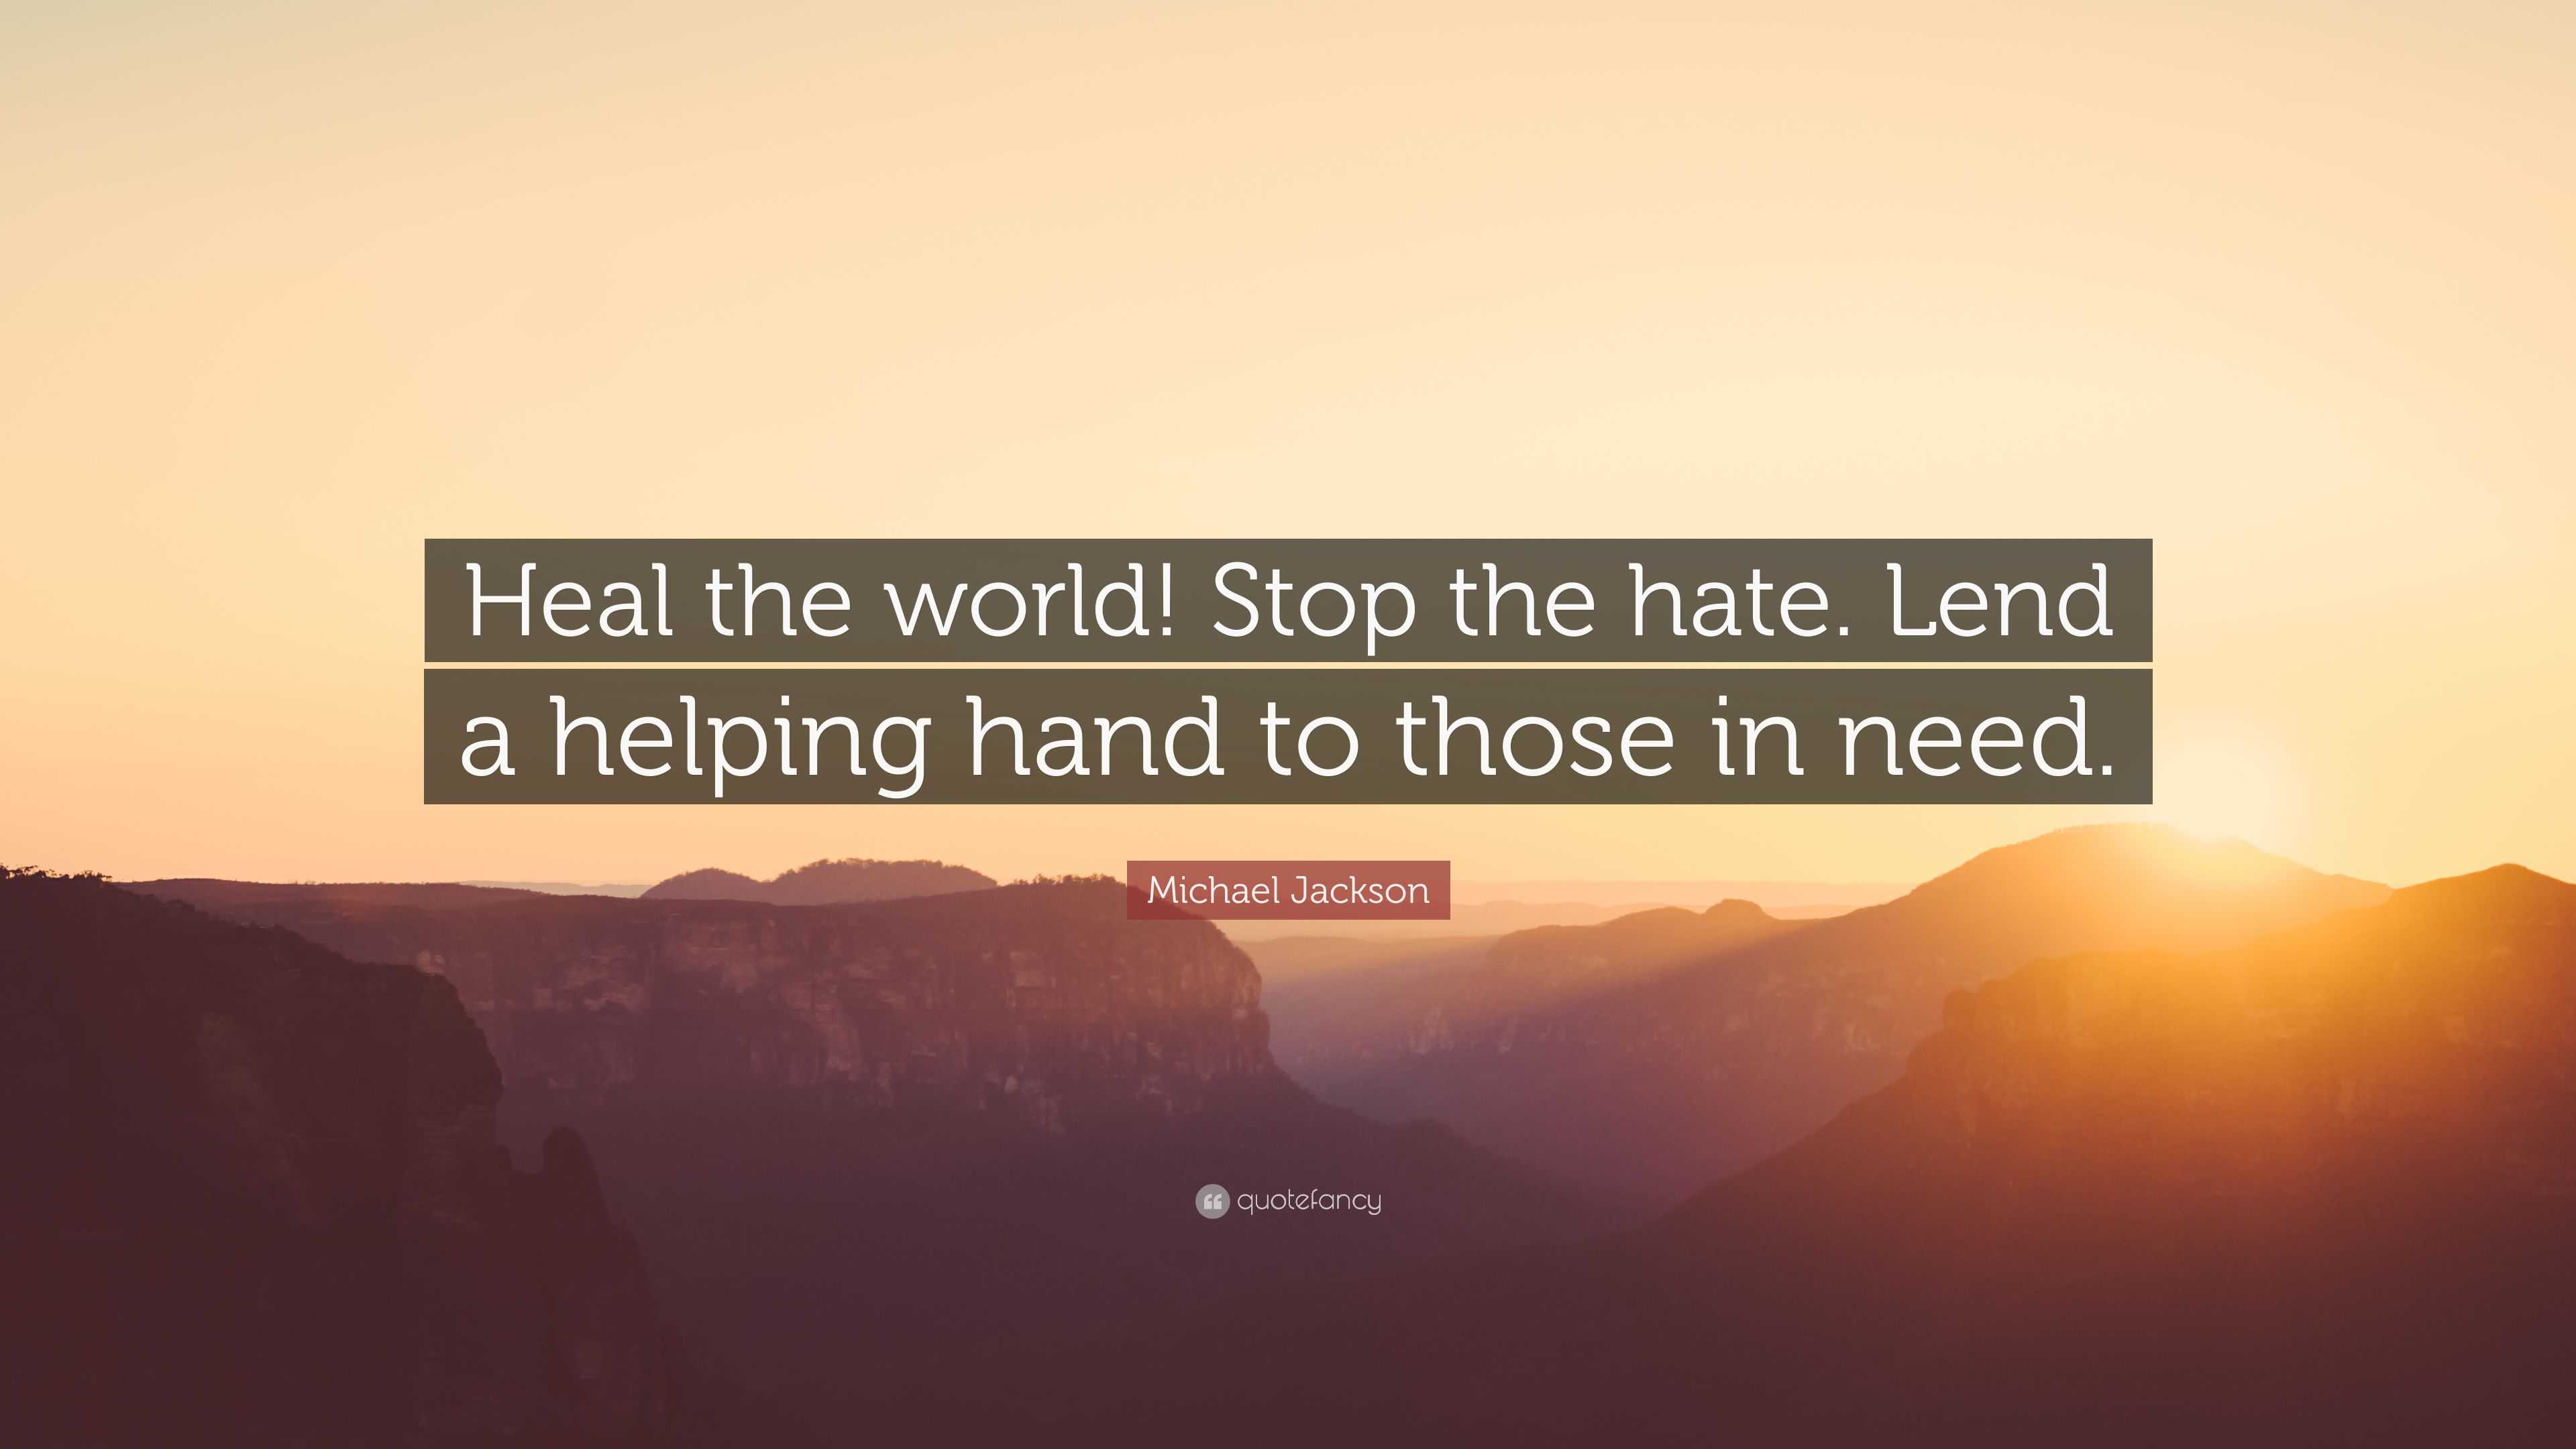 Michael Jackson Quote: “Heal the world! Stop the hate. Lend a helping ...
